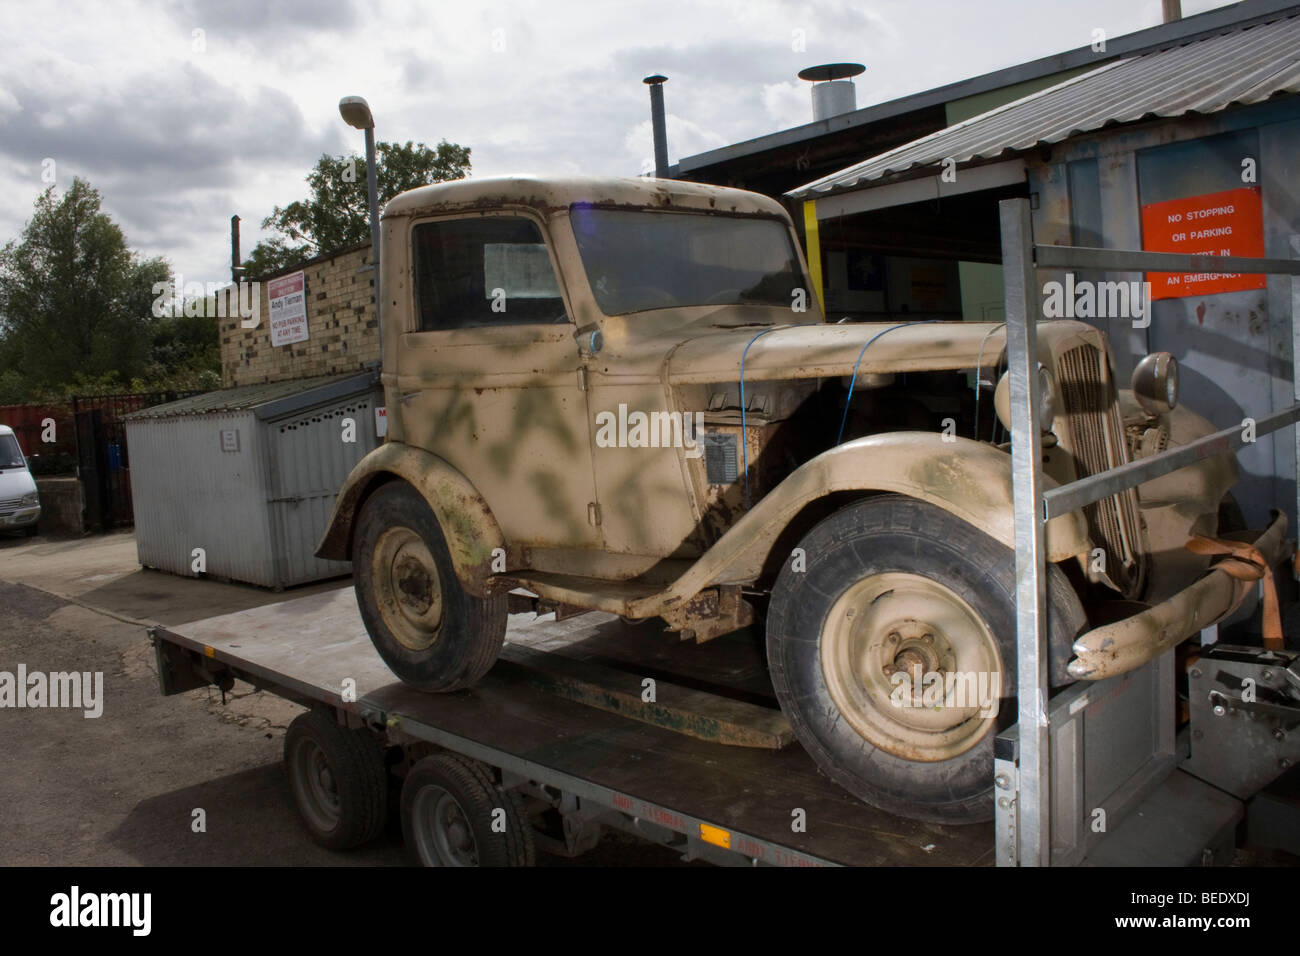 A German Hanomag vehicle from the 1940s intended for towing Stock Photo